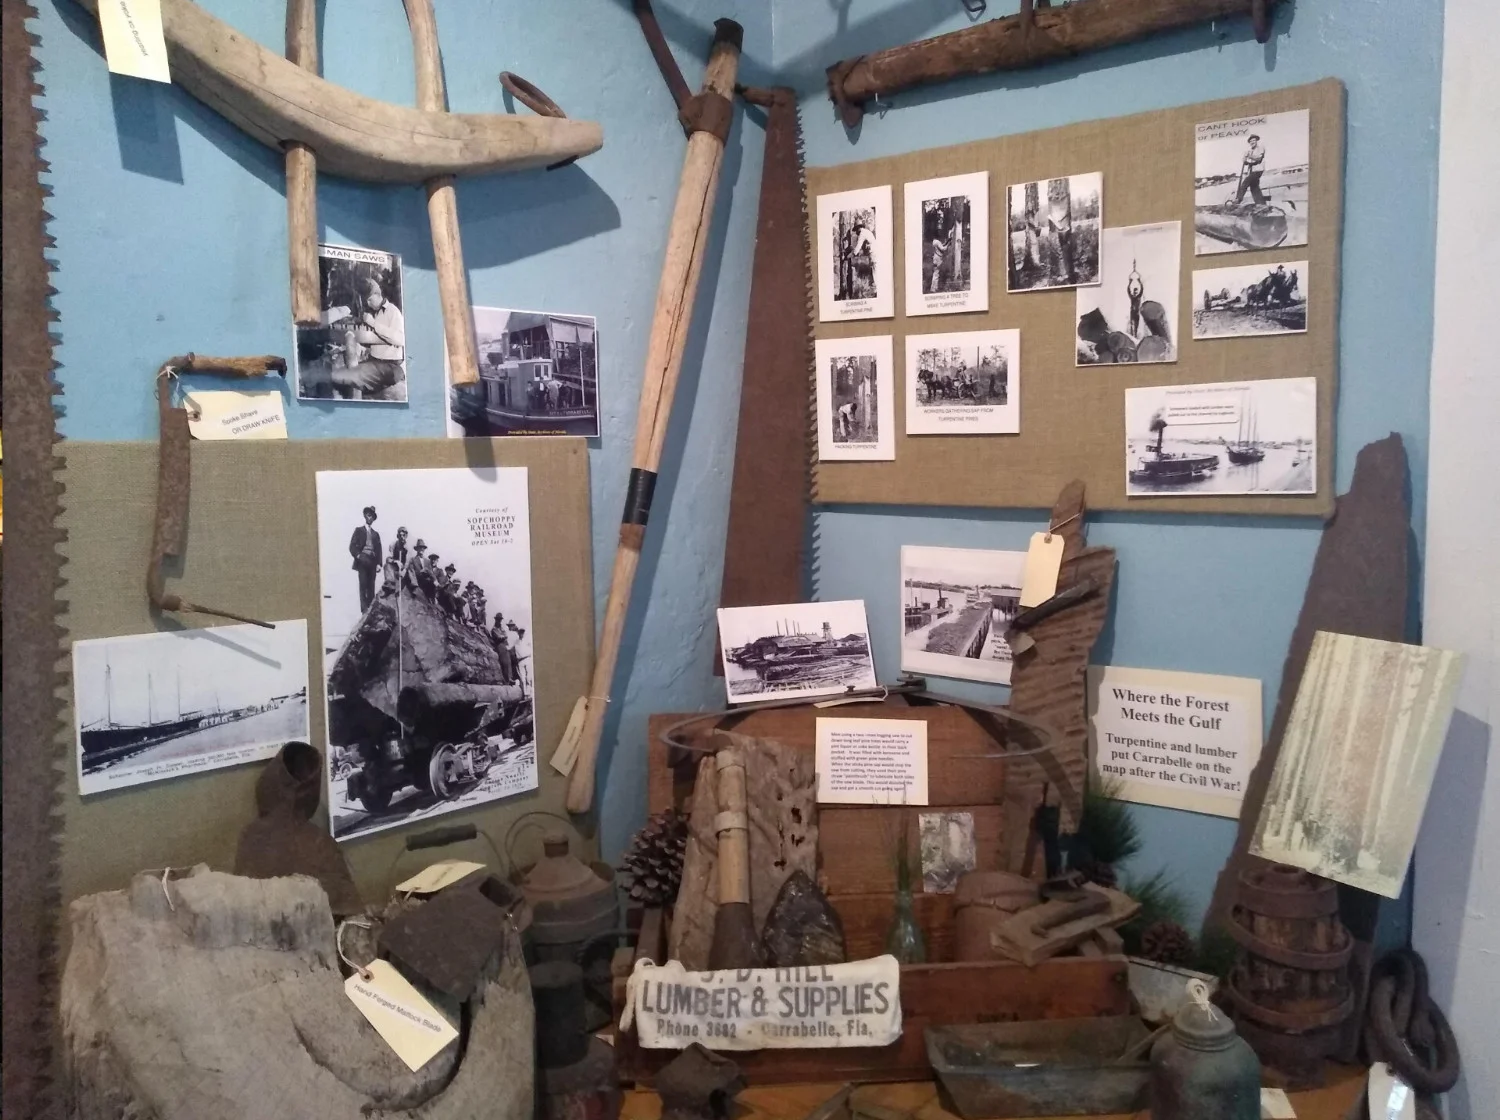 Special Exhibit on Innovations and Adaptations in Carrabelle